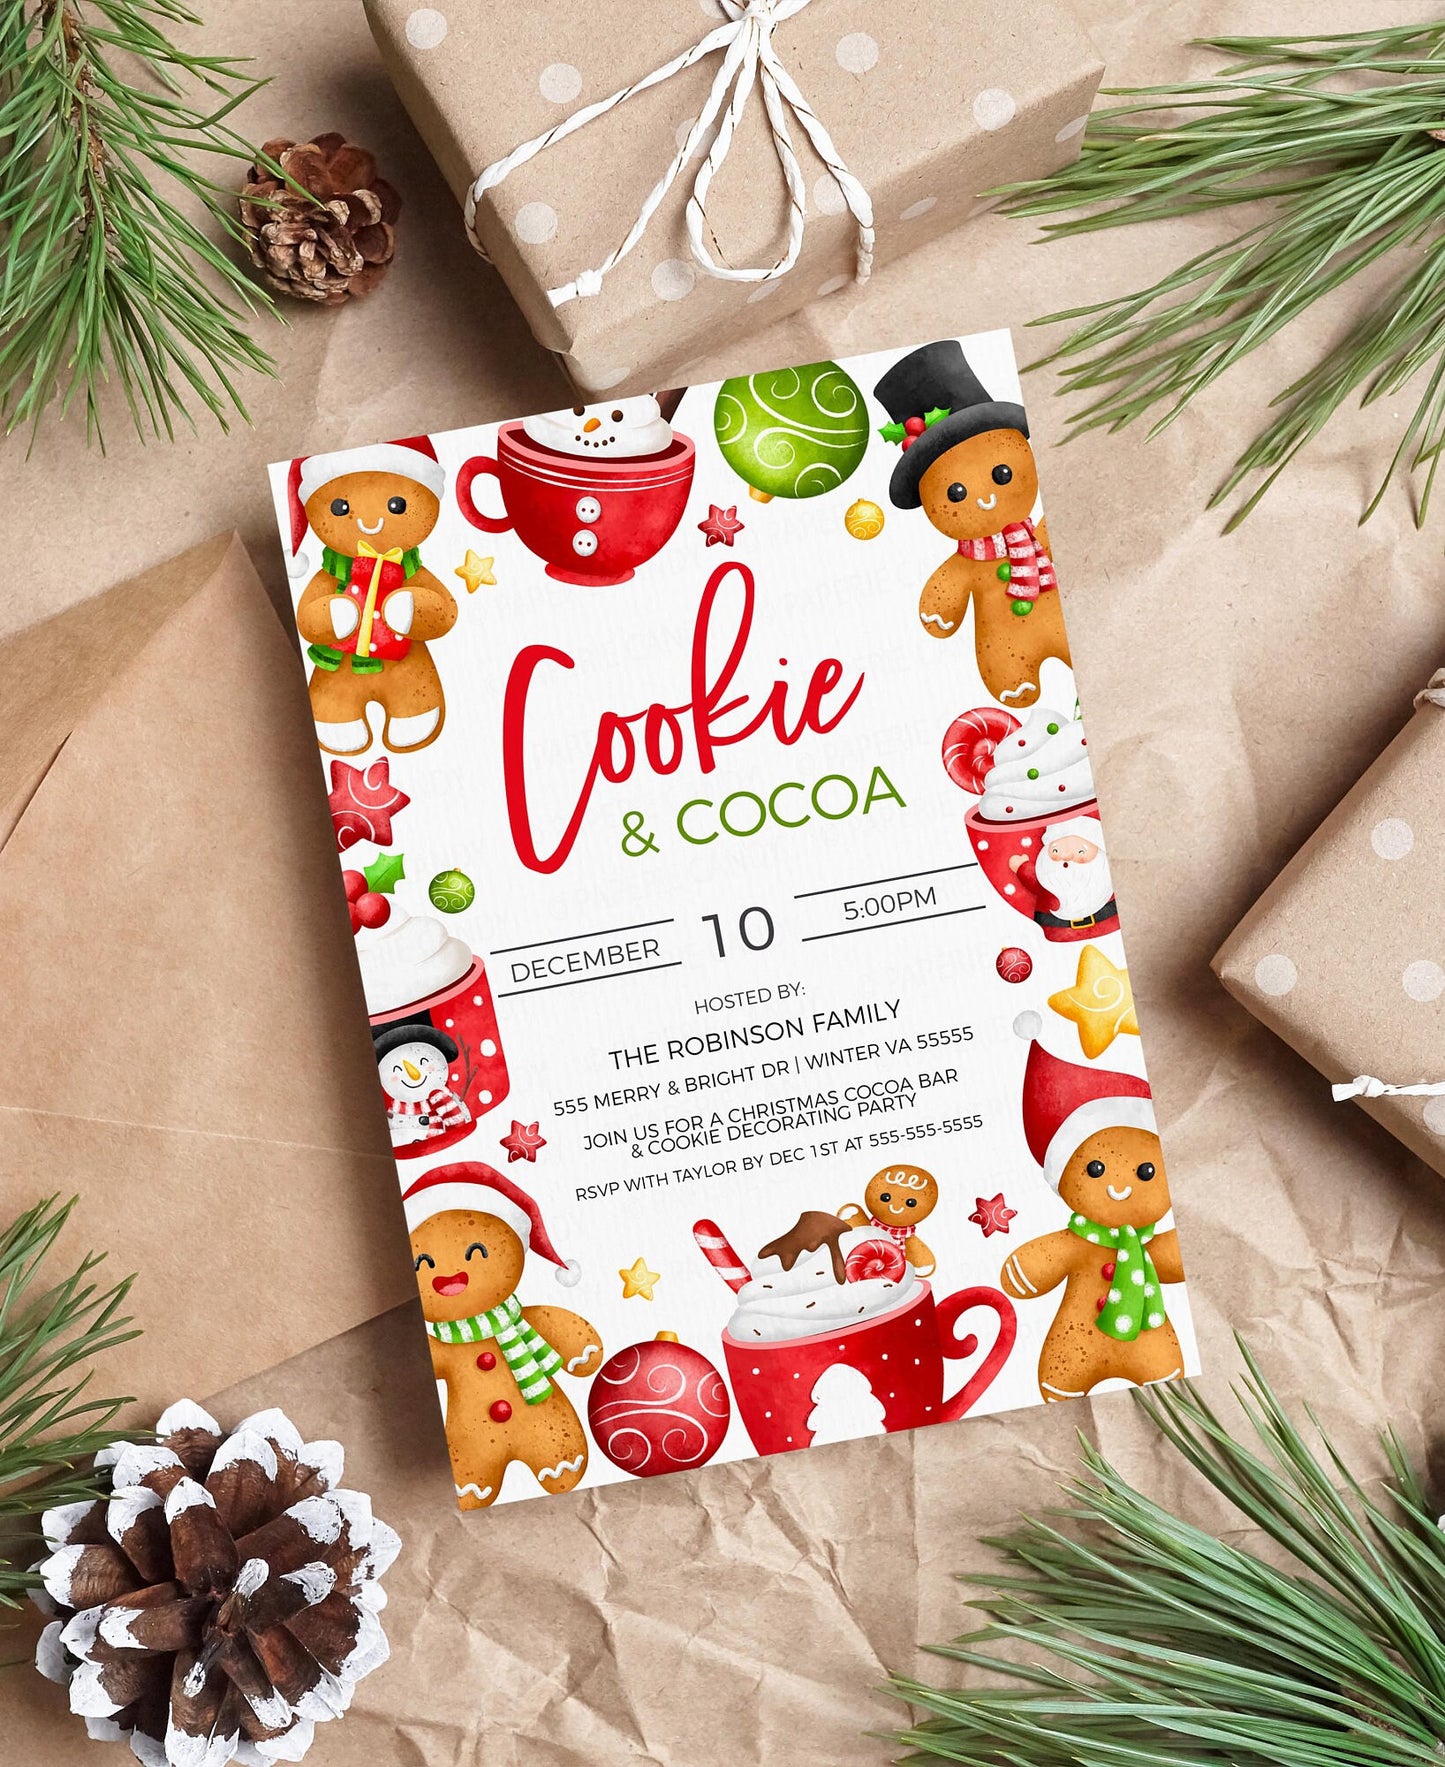 Editable Cookies & Cocoa Party Invitation, Cookie Decorating Party Invite, Hot Chocolate Bar, Cookie Cocoa Birthday Party Printable Template